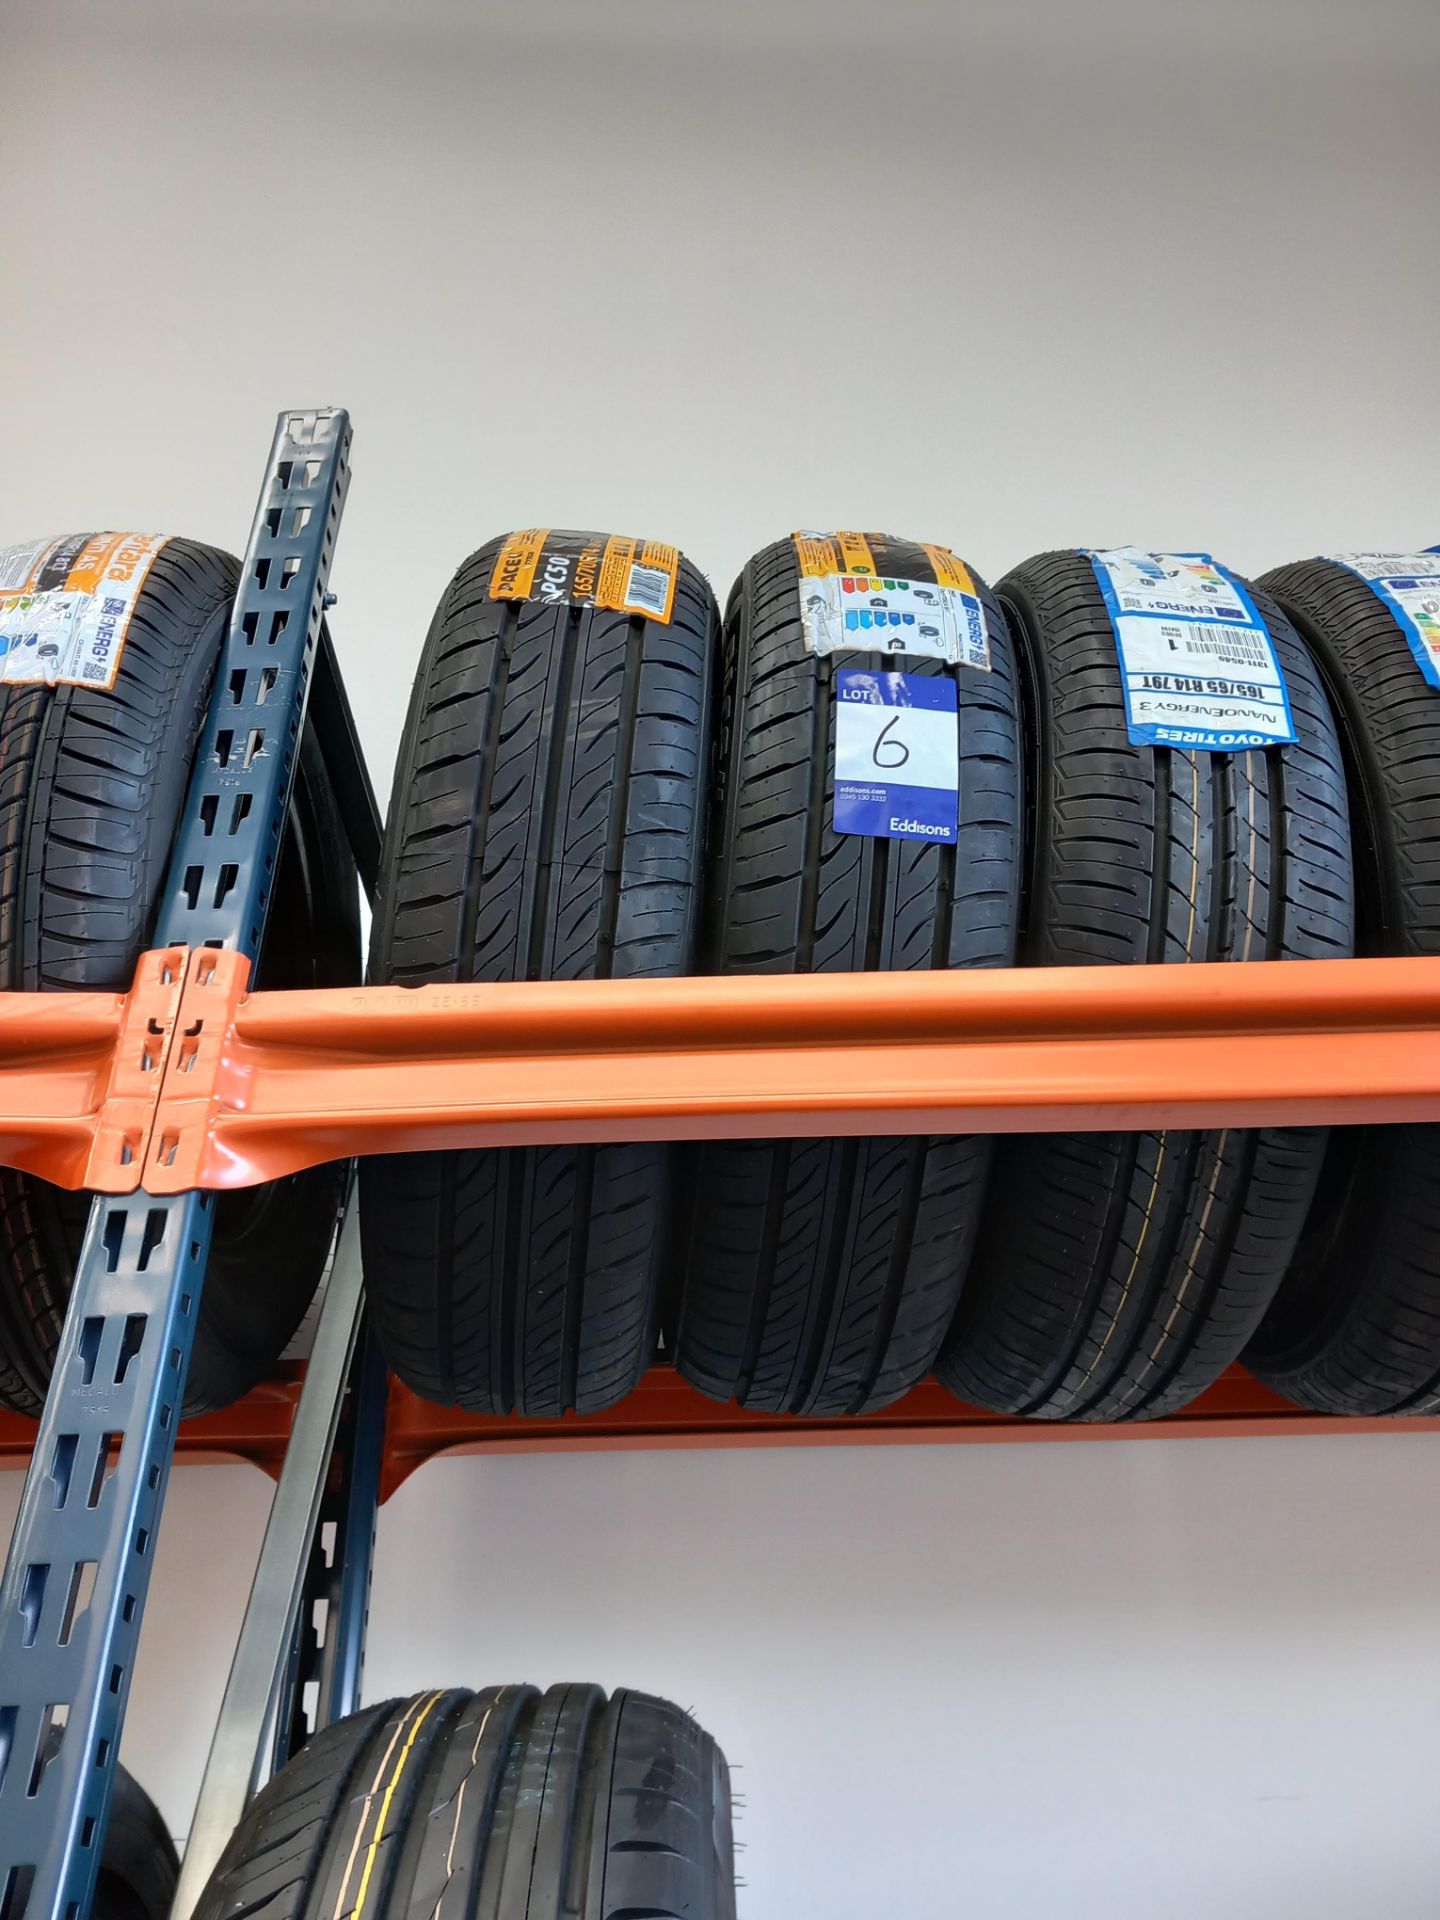 2 Pace PC 50 165/70 14 Tyres -This is a Composite lot made up of Lots 1 - 96 inclusive. At the end o